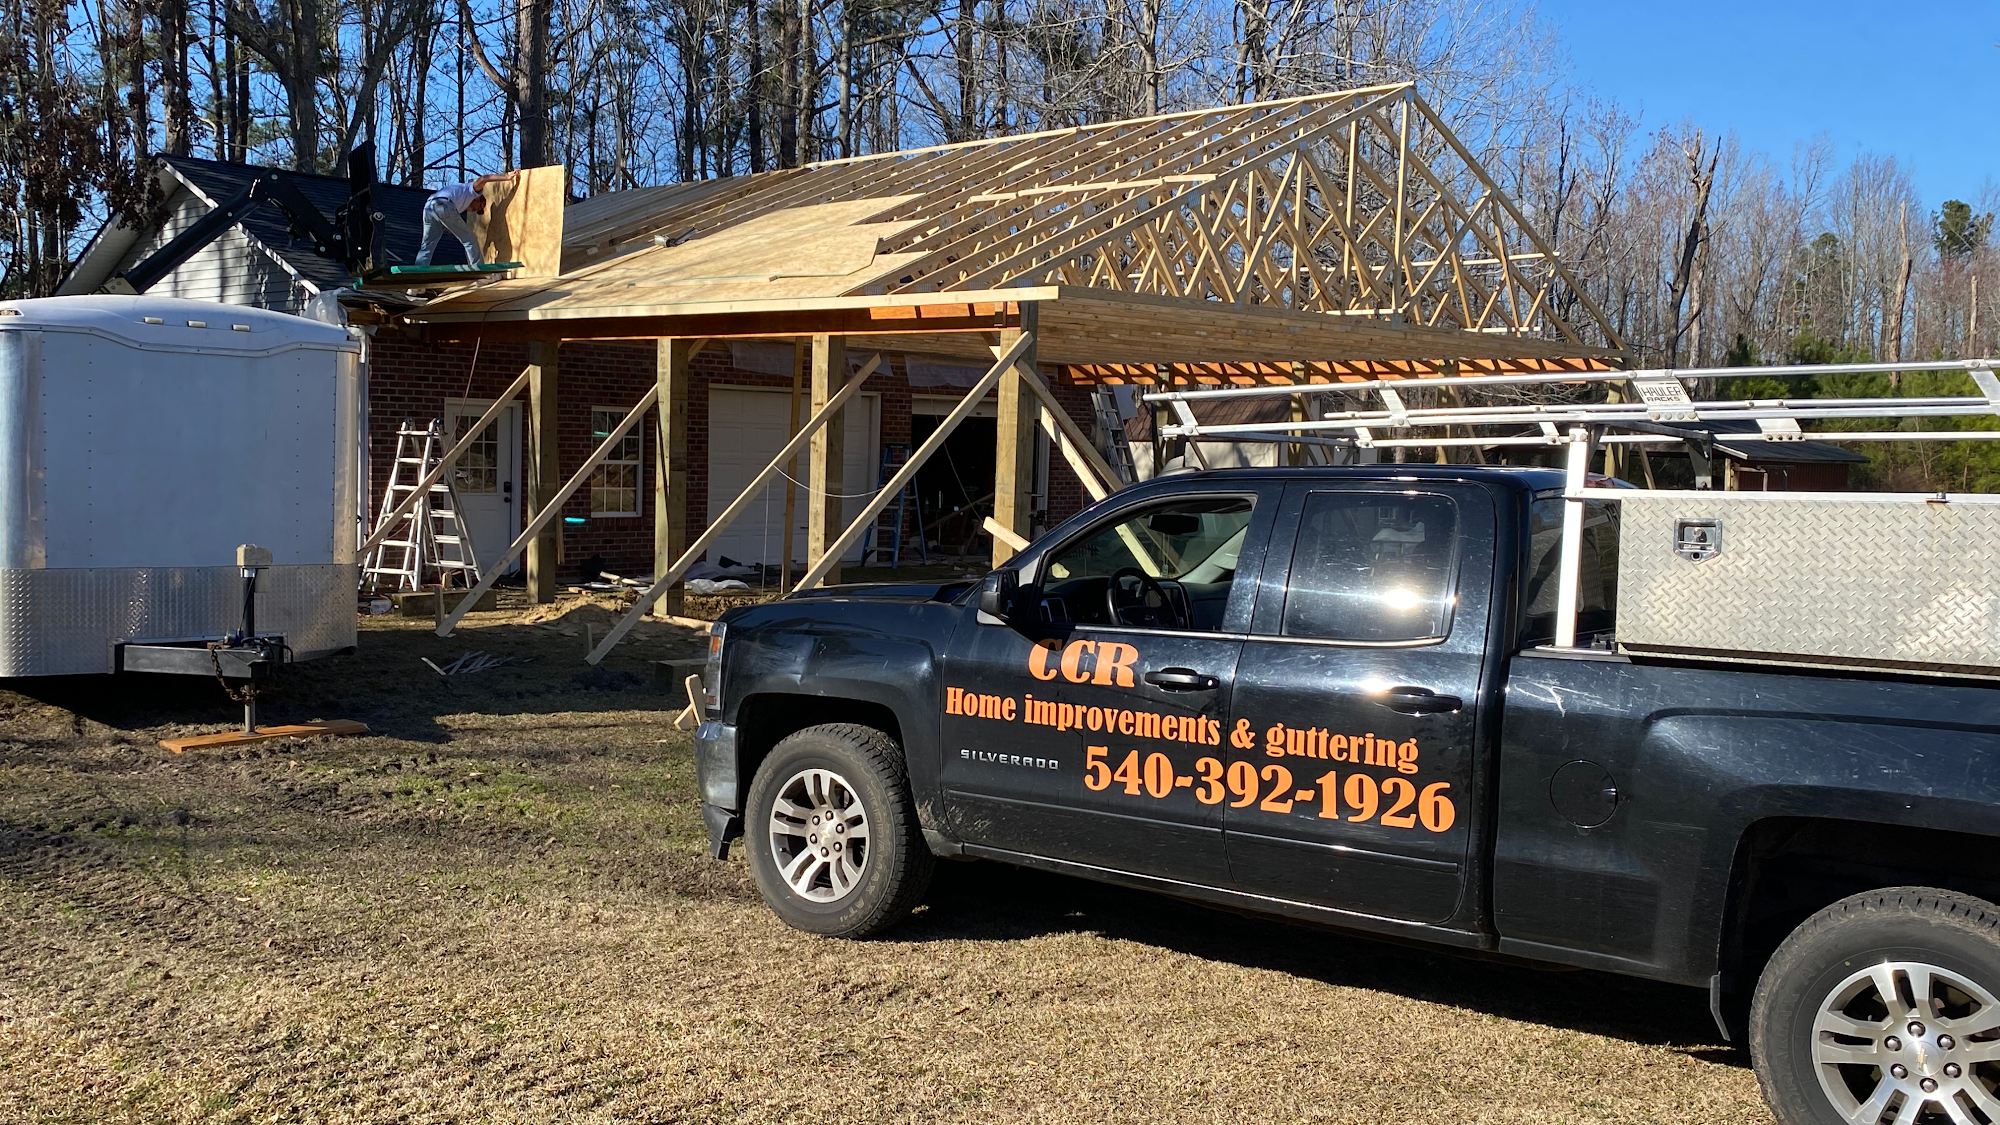 CCR Home Improvements roofing guttering and siding